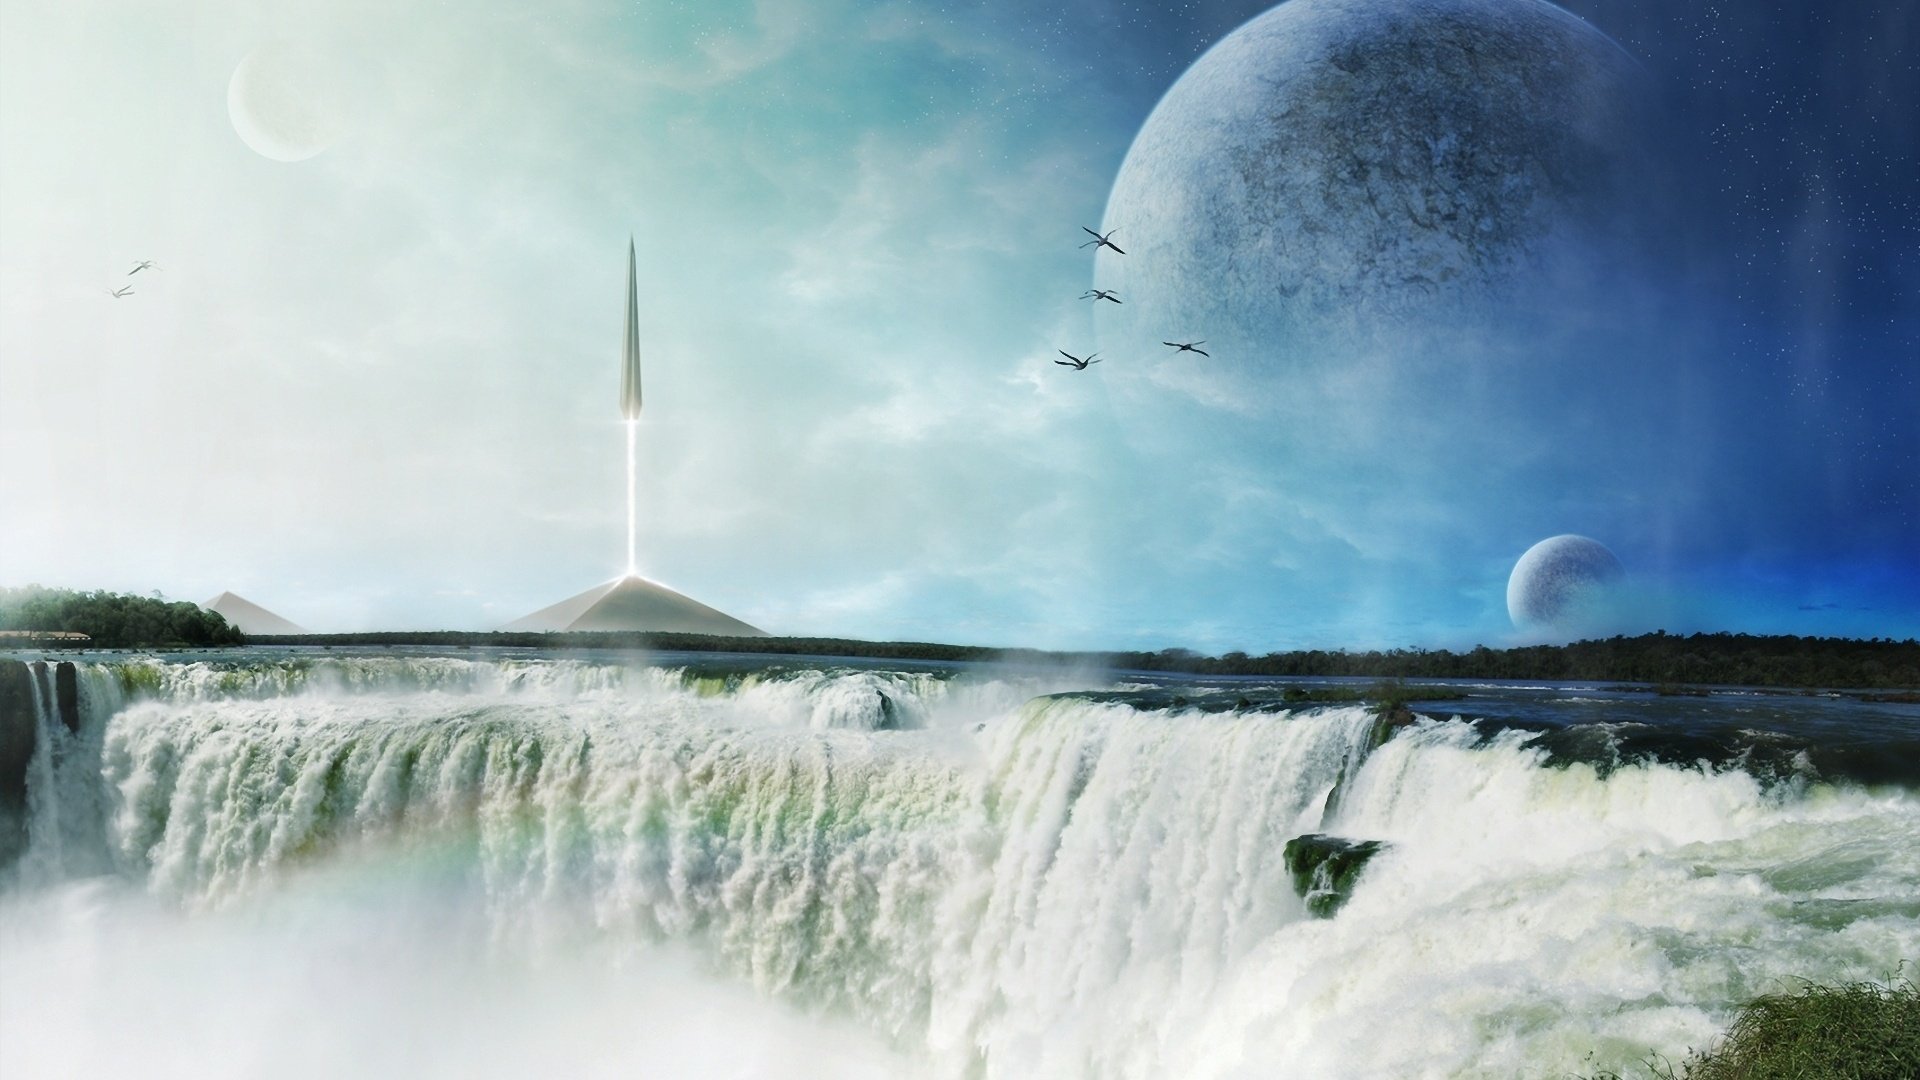 spire, Ship, Planets, The, Waterfall, The, Pyramids, The, Rocket, Art Wallpaper